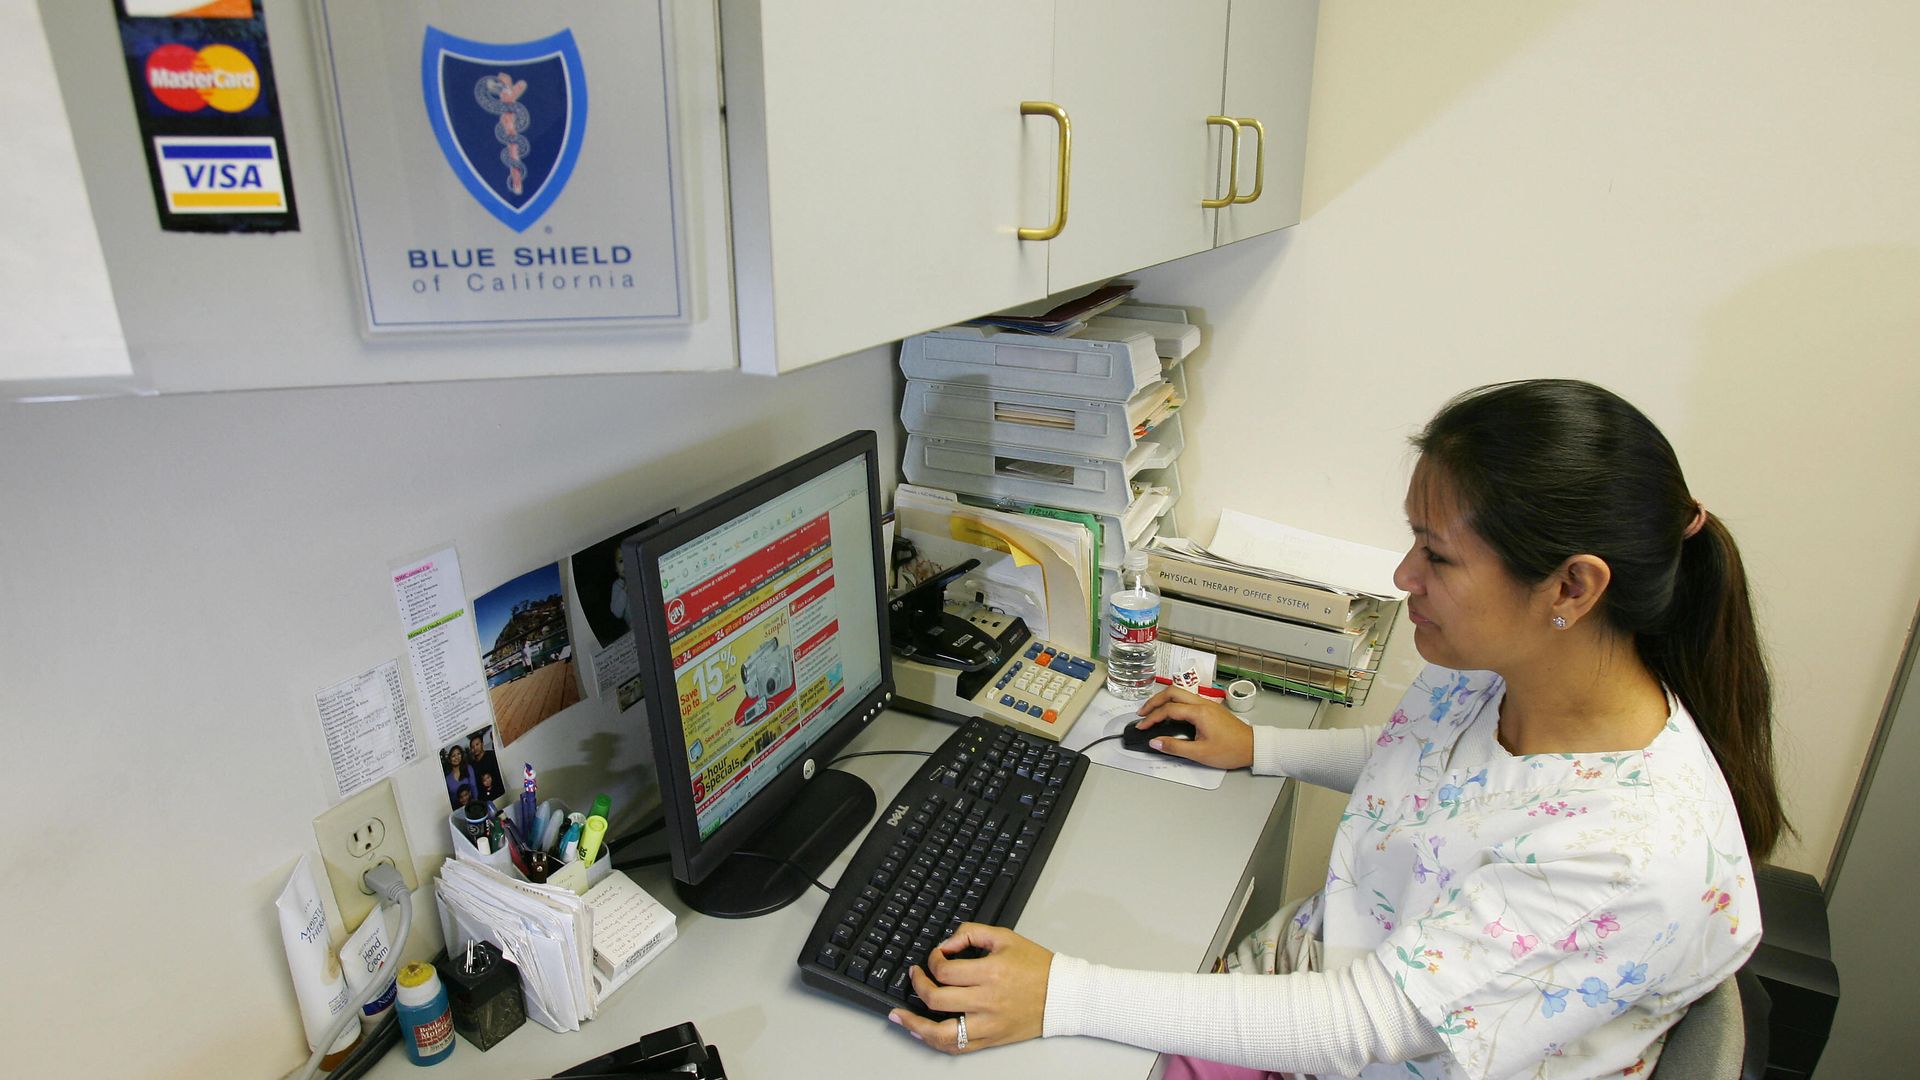 A medical billing specialist sits at her computer